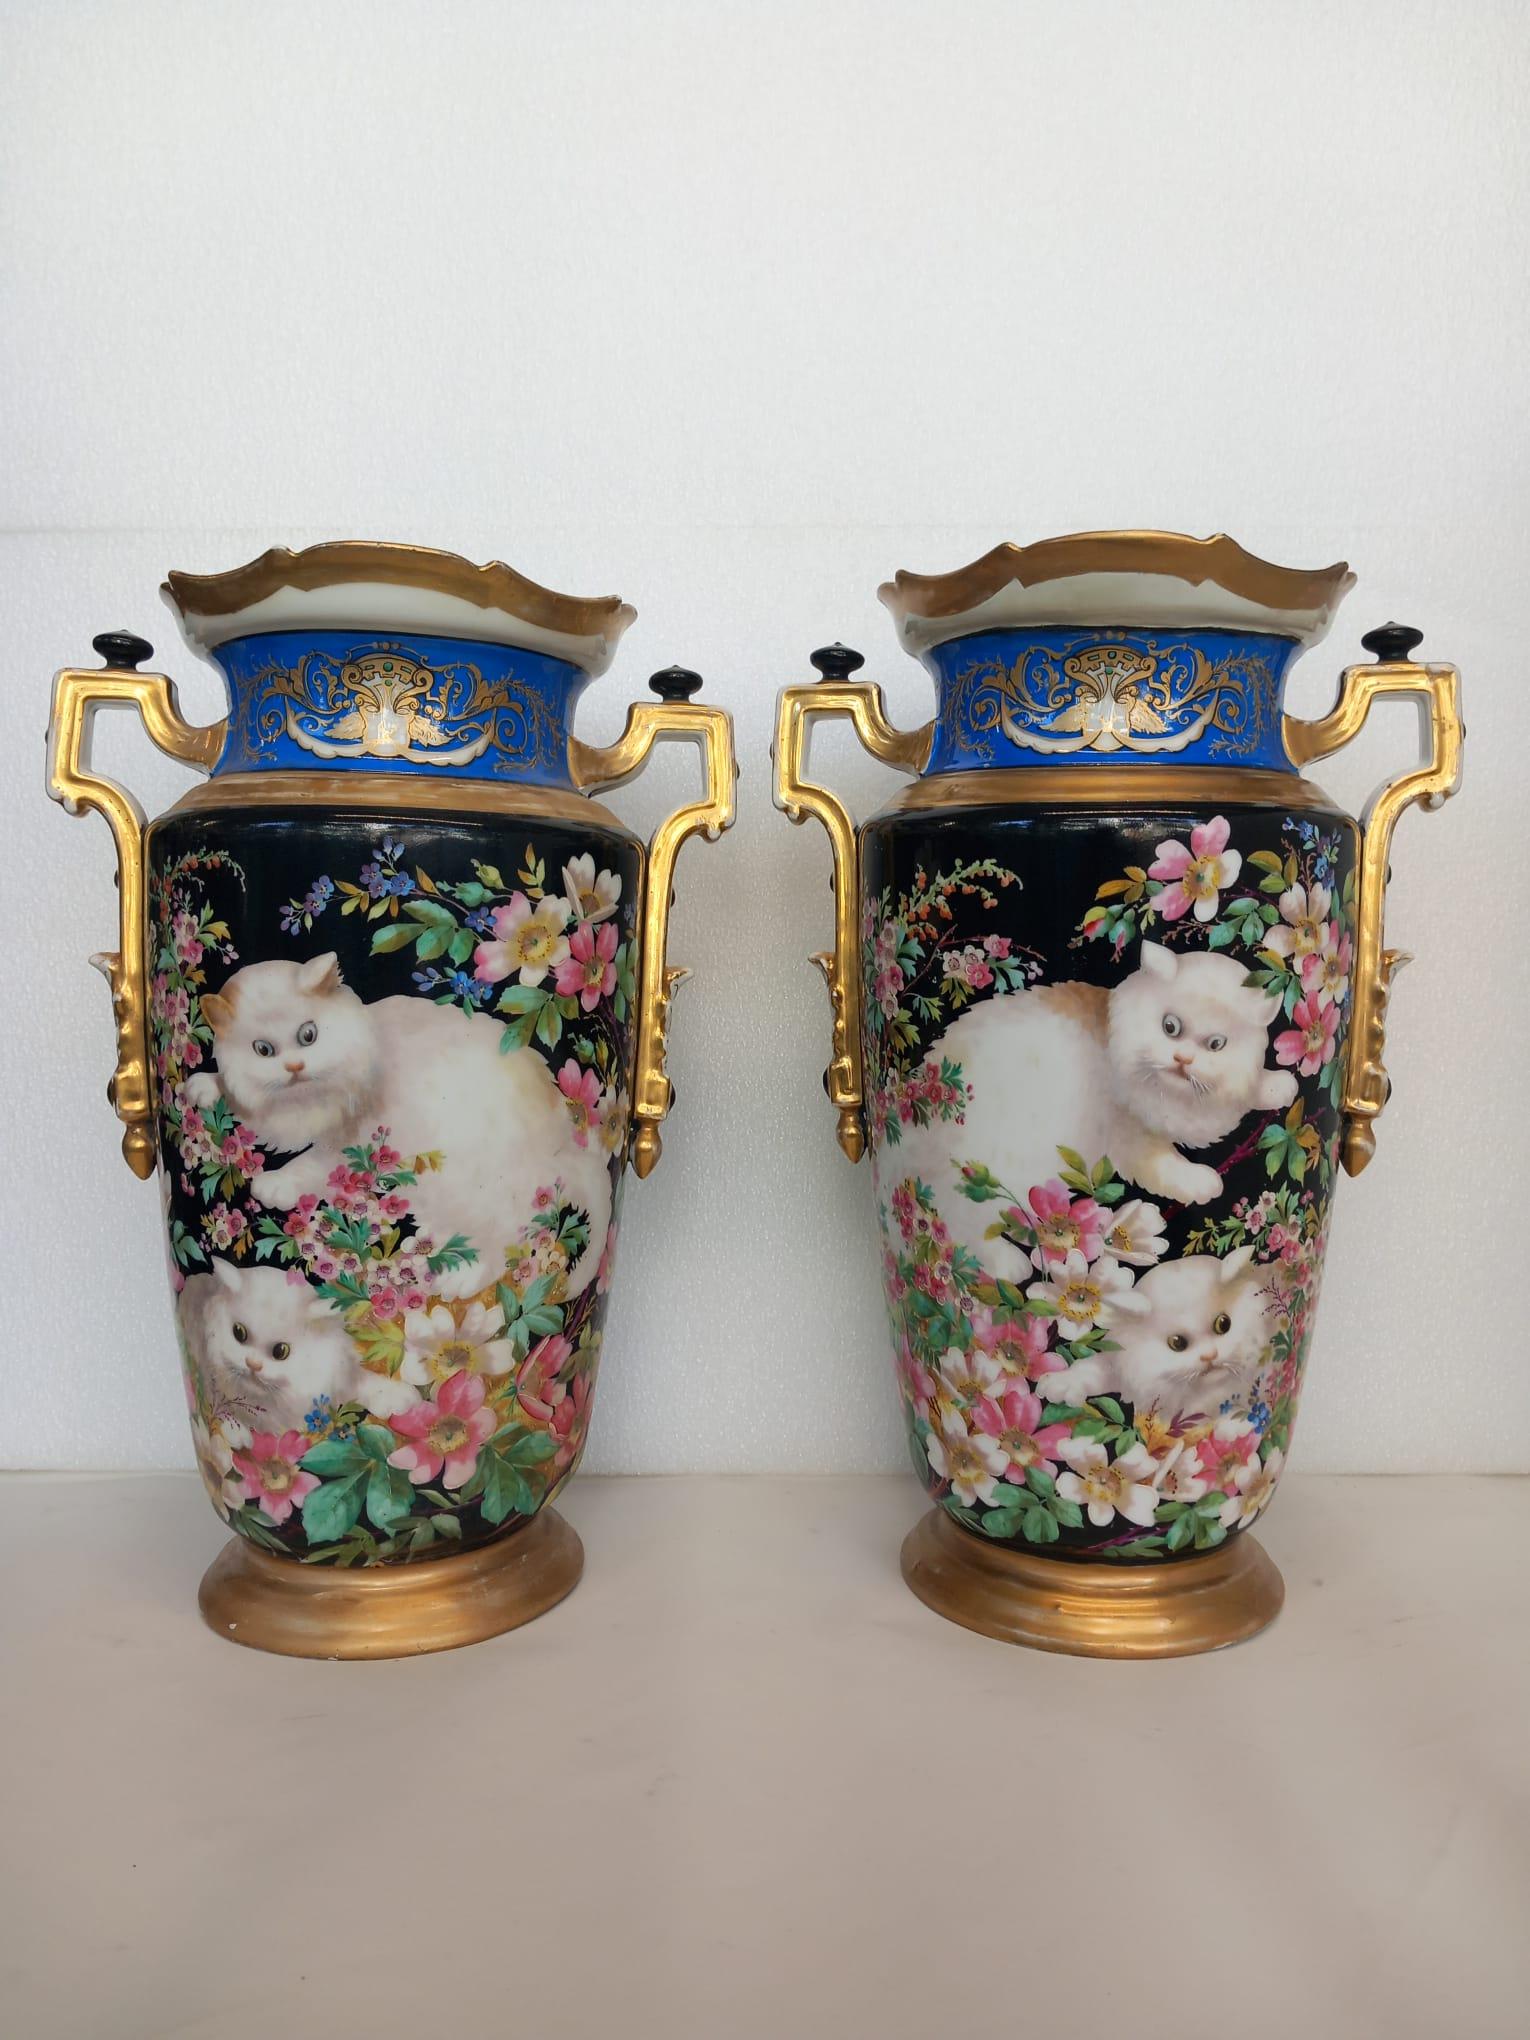 French Provincial Pair of 19th Century highly decorative Parisian vases  For Sale